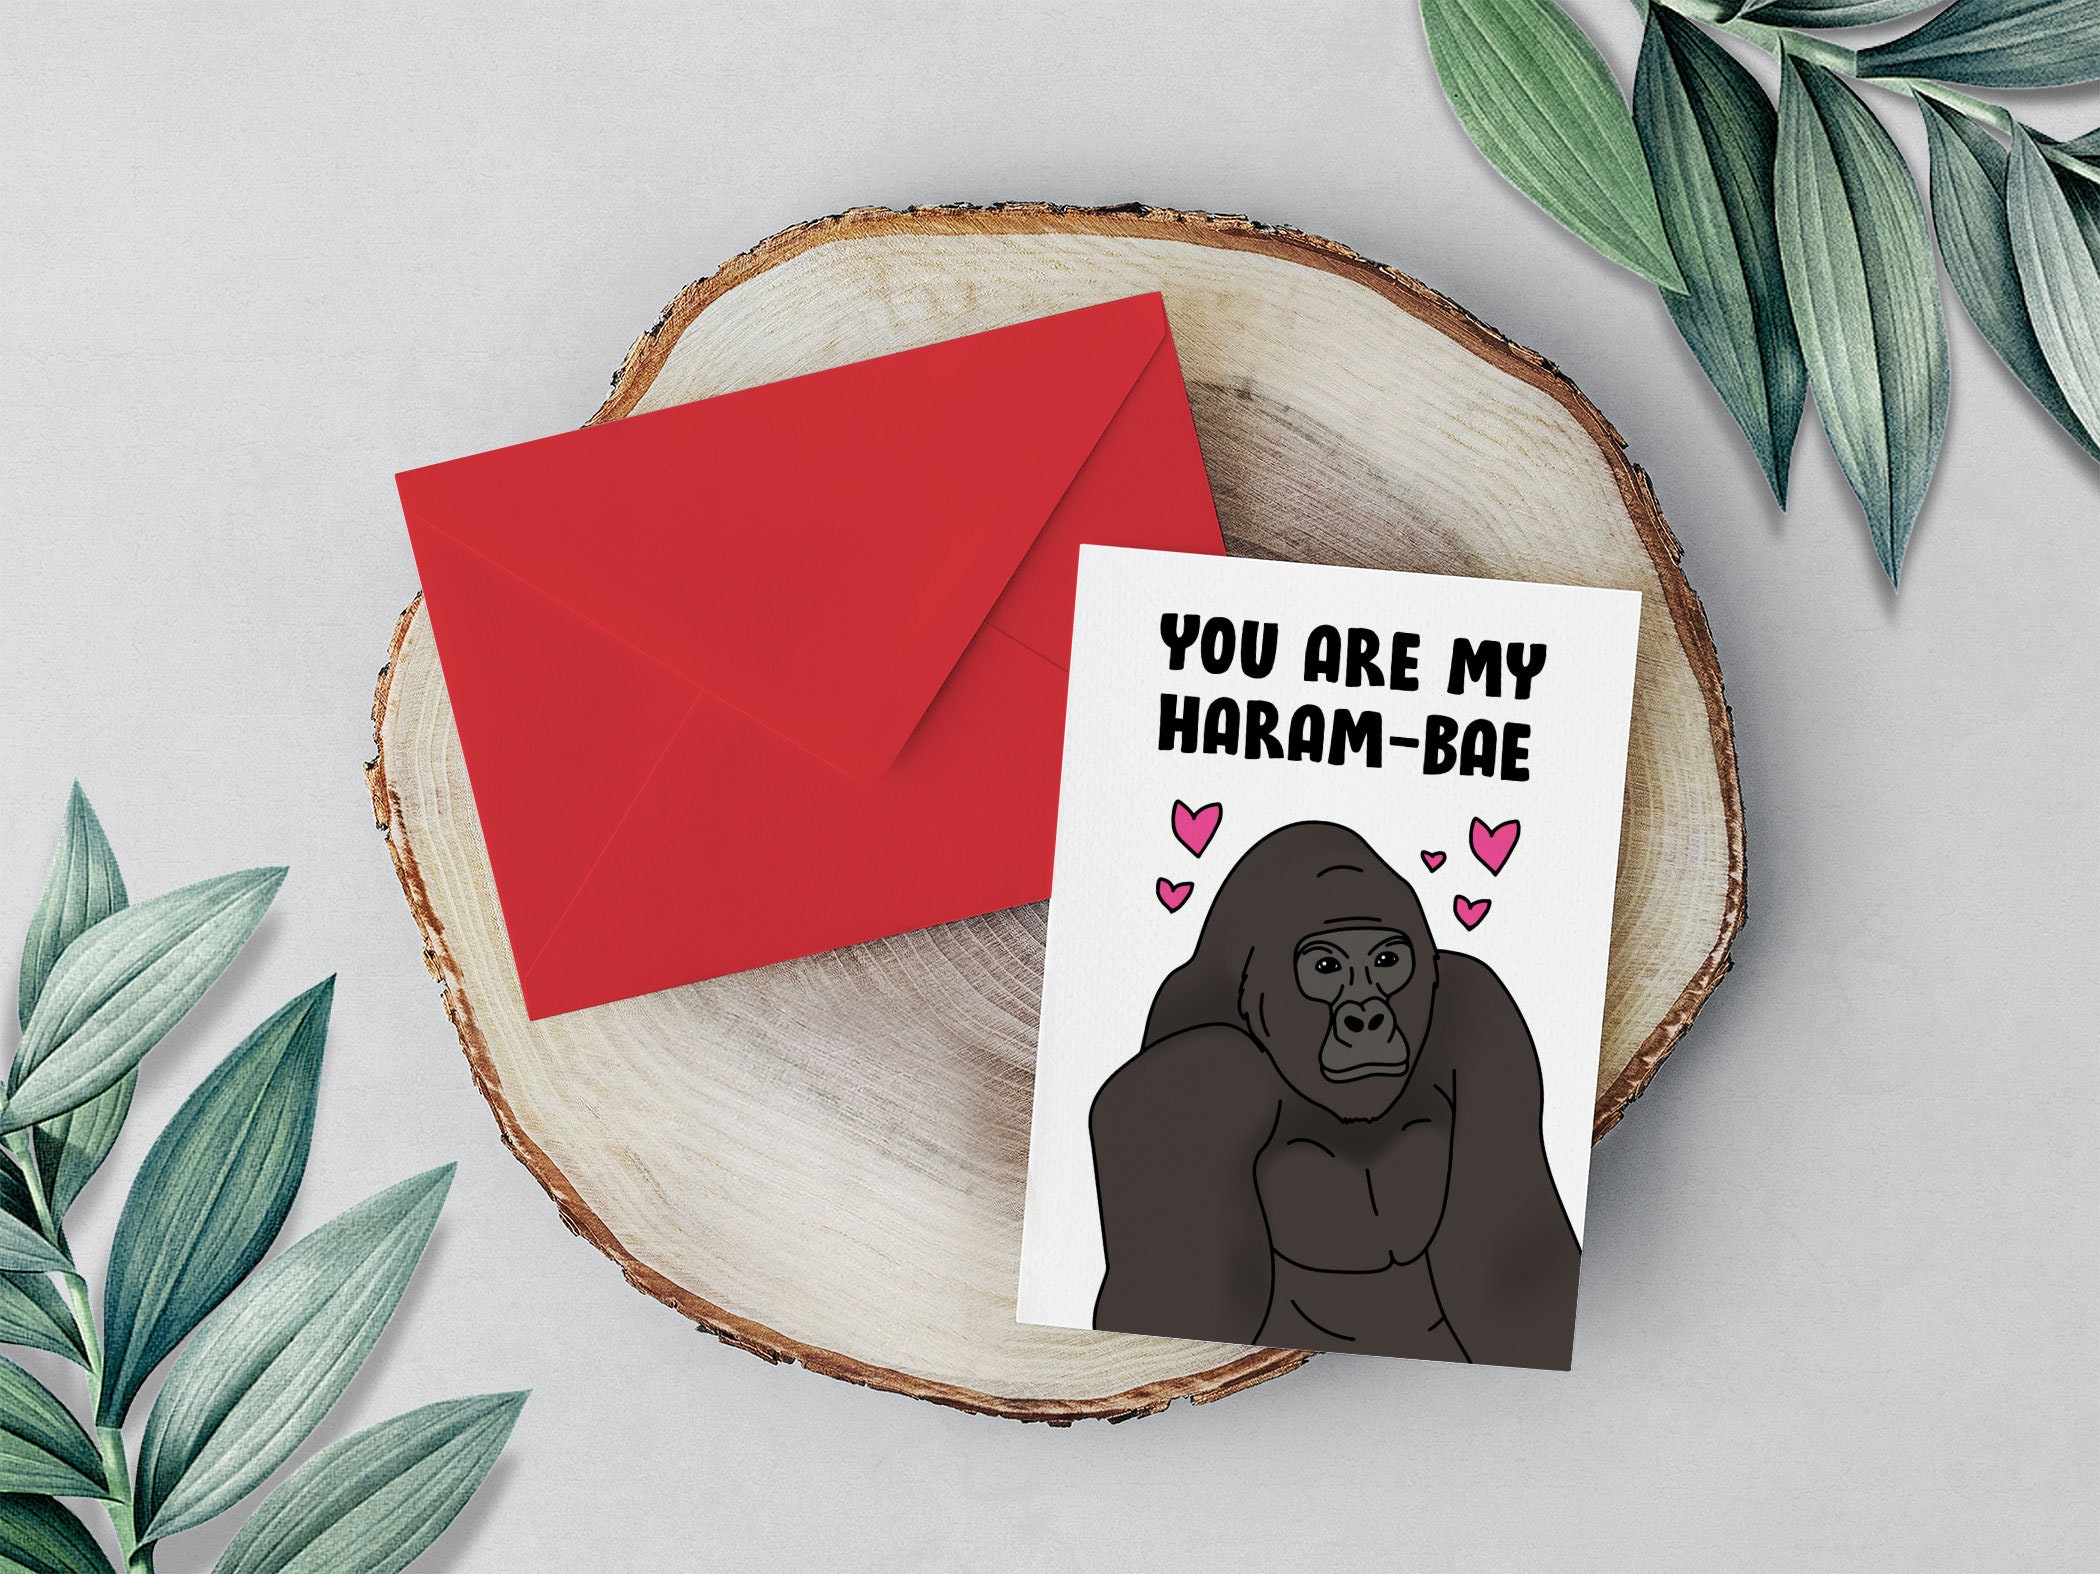 Funny Valentines for Husband Card, Wooden Husband Valentines Day Card for  Him, Valentine Cards, 